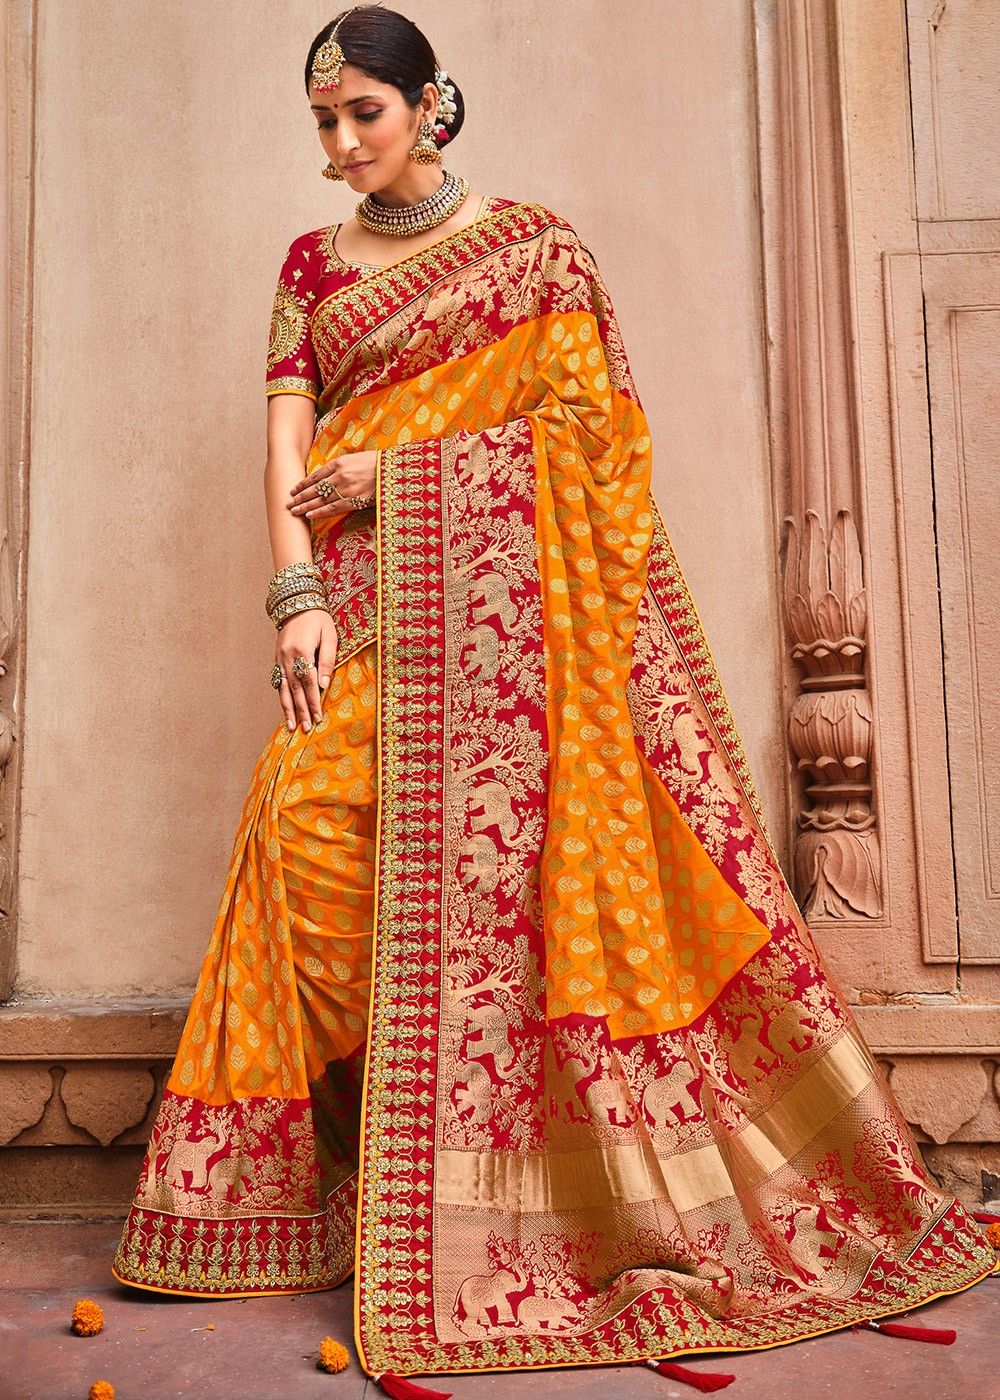 Why Paithani Sarees are more demanding?